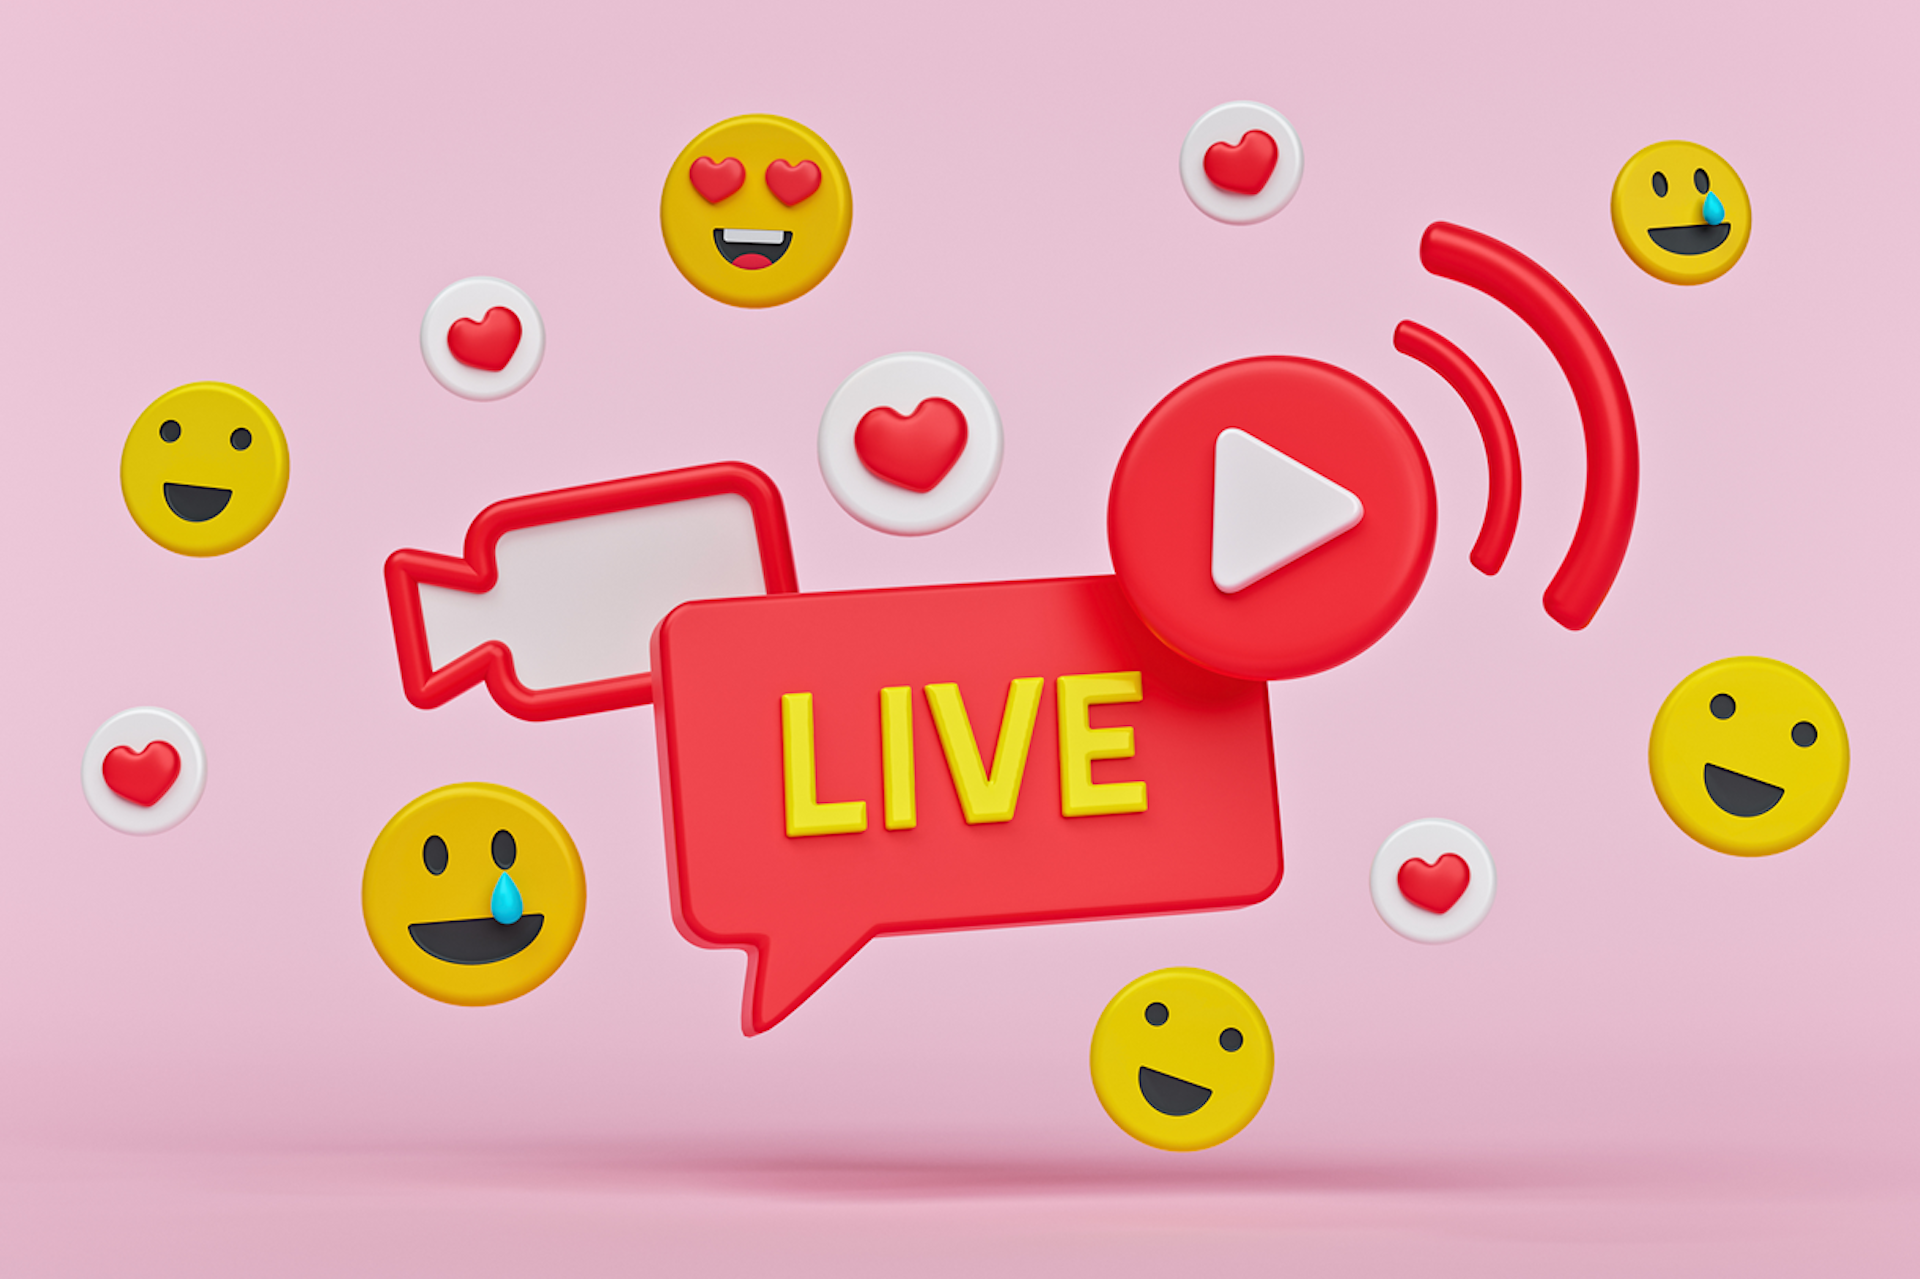 Illustration showing a live button, broadcasting play button, and video camera symbol surrounded by happy face emojis and hearts. Blog post header image about Livestreams for brands.